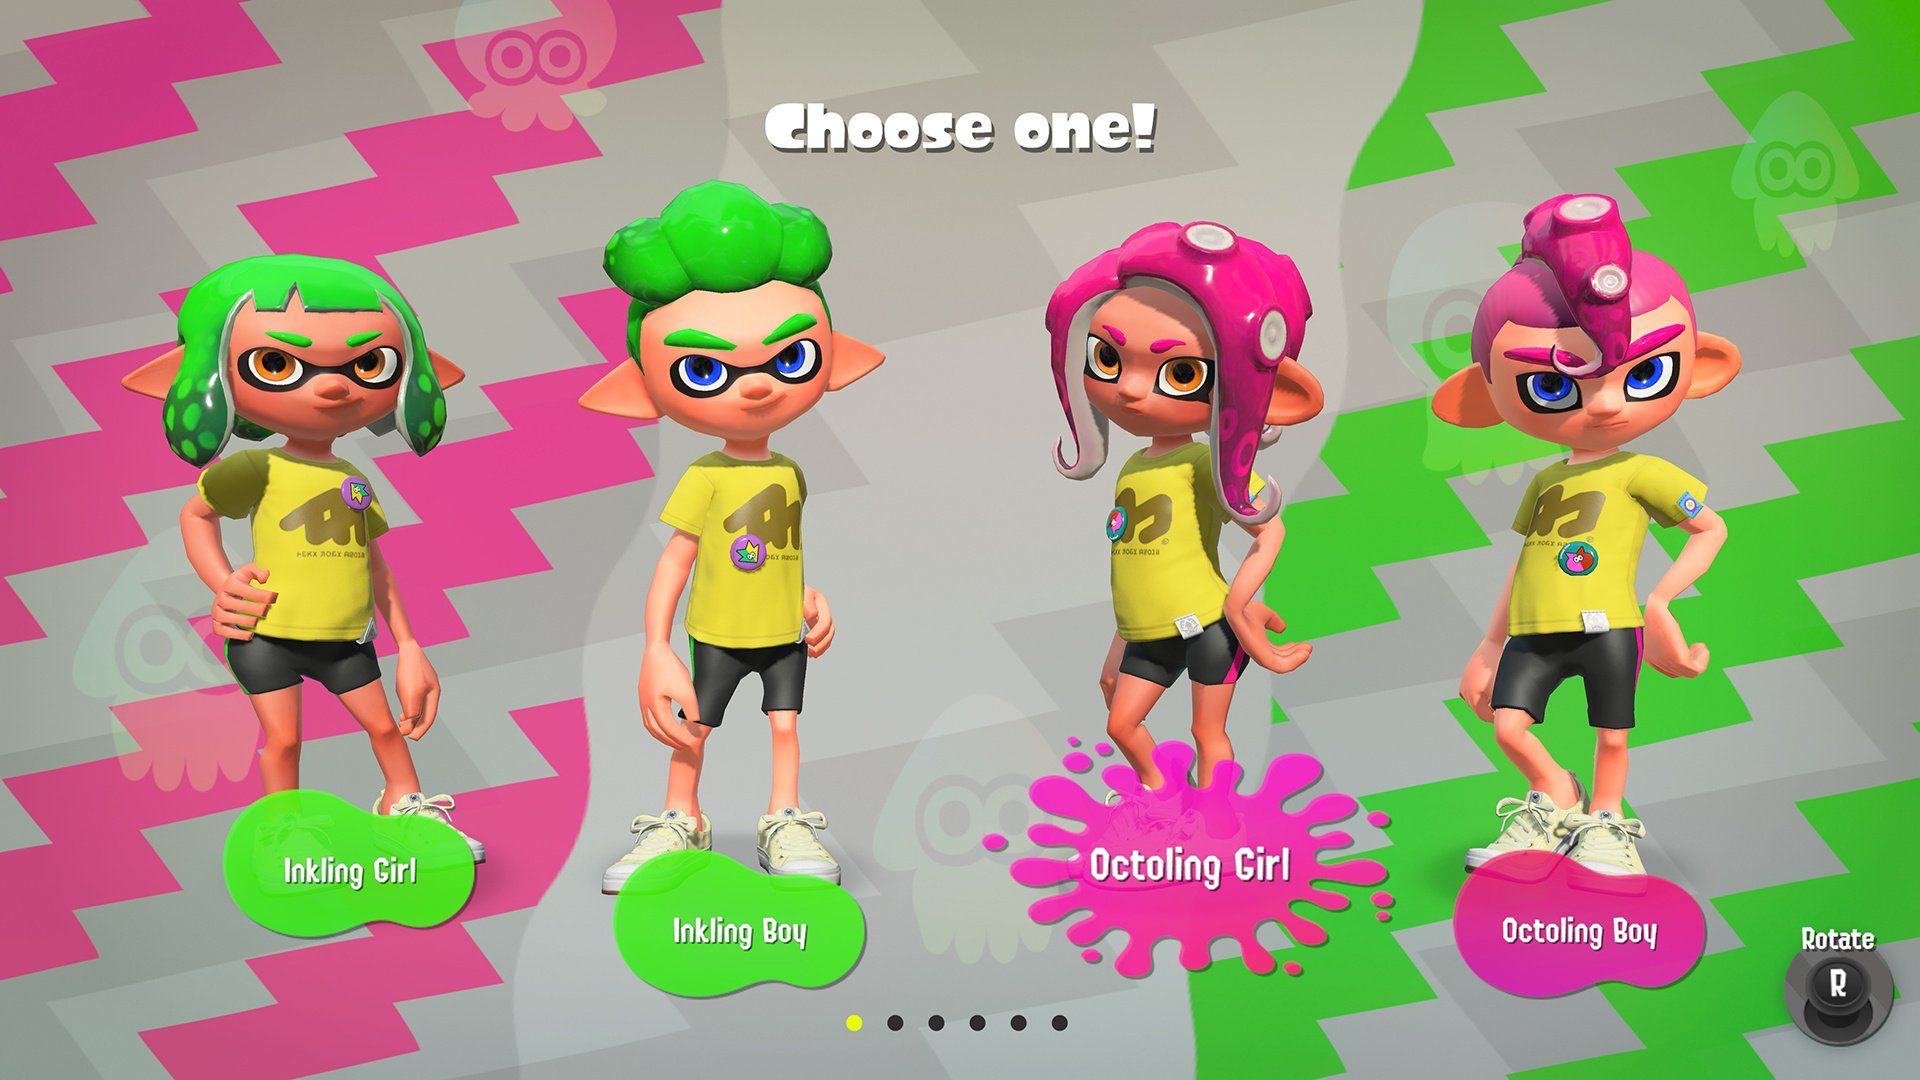 You Can Play As Either A Male Or A Female Octoling In Splatoon 2's Octo Expansion